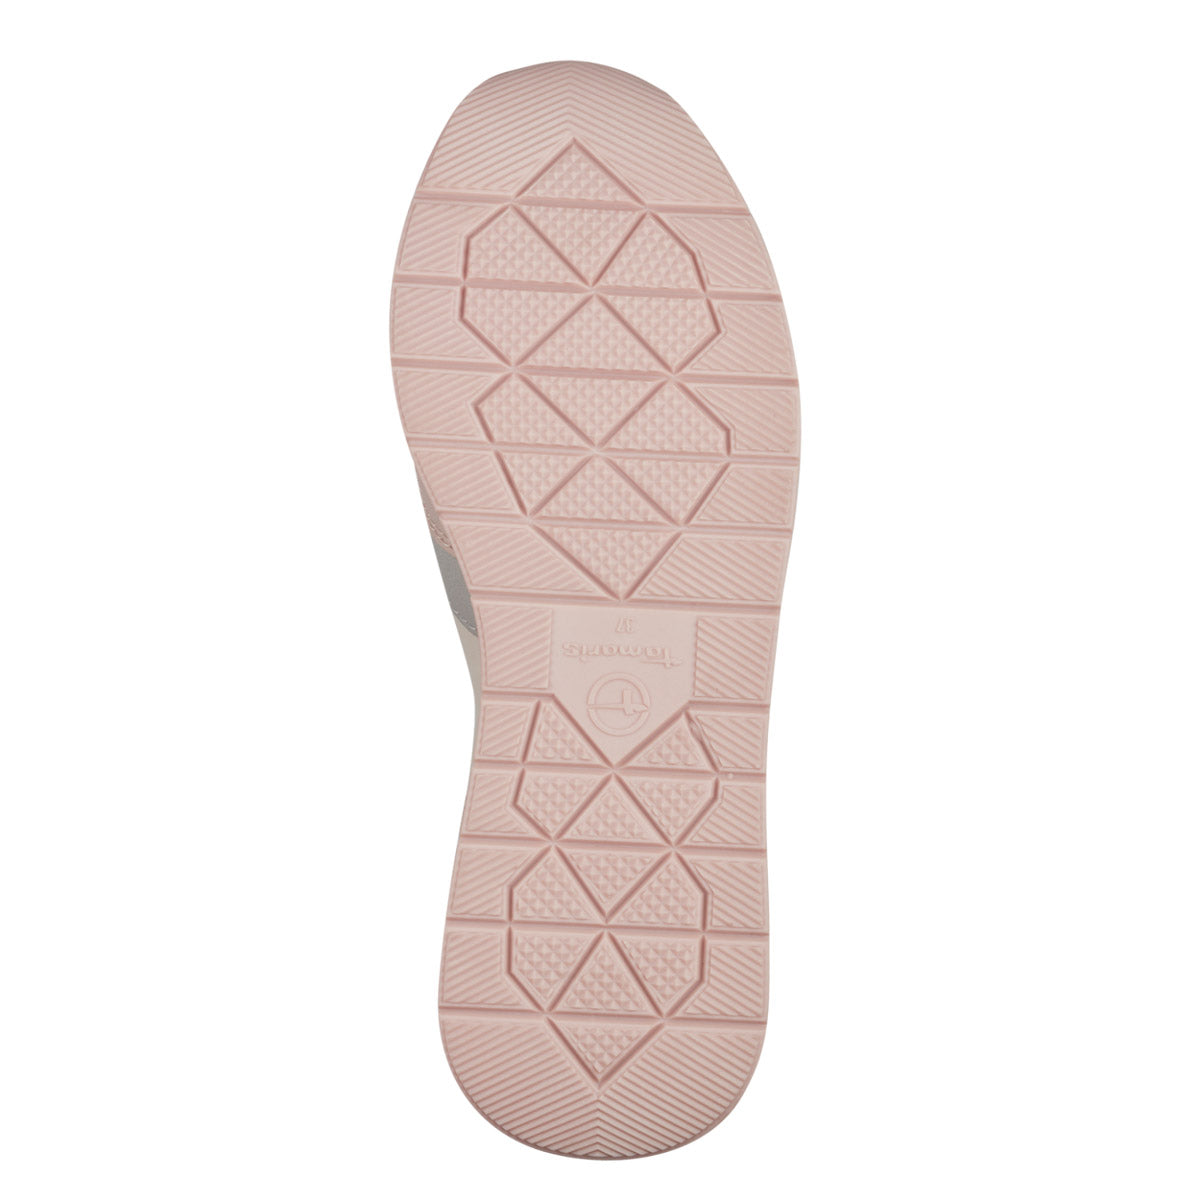  Bottom view of the Tamaris sneaker's sole with white and light pink design.